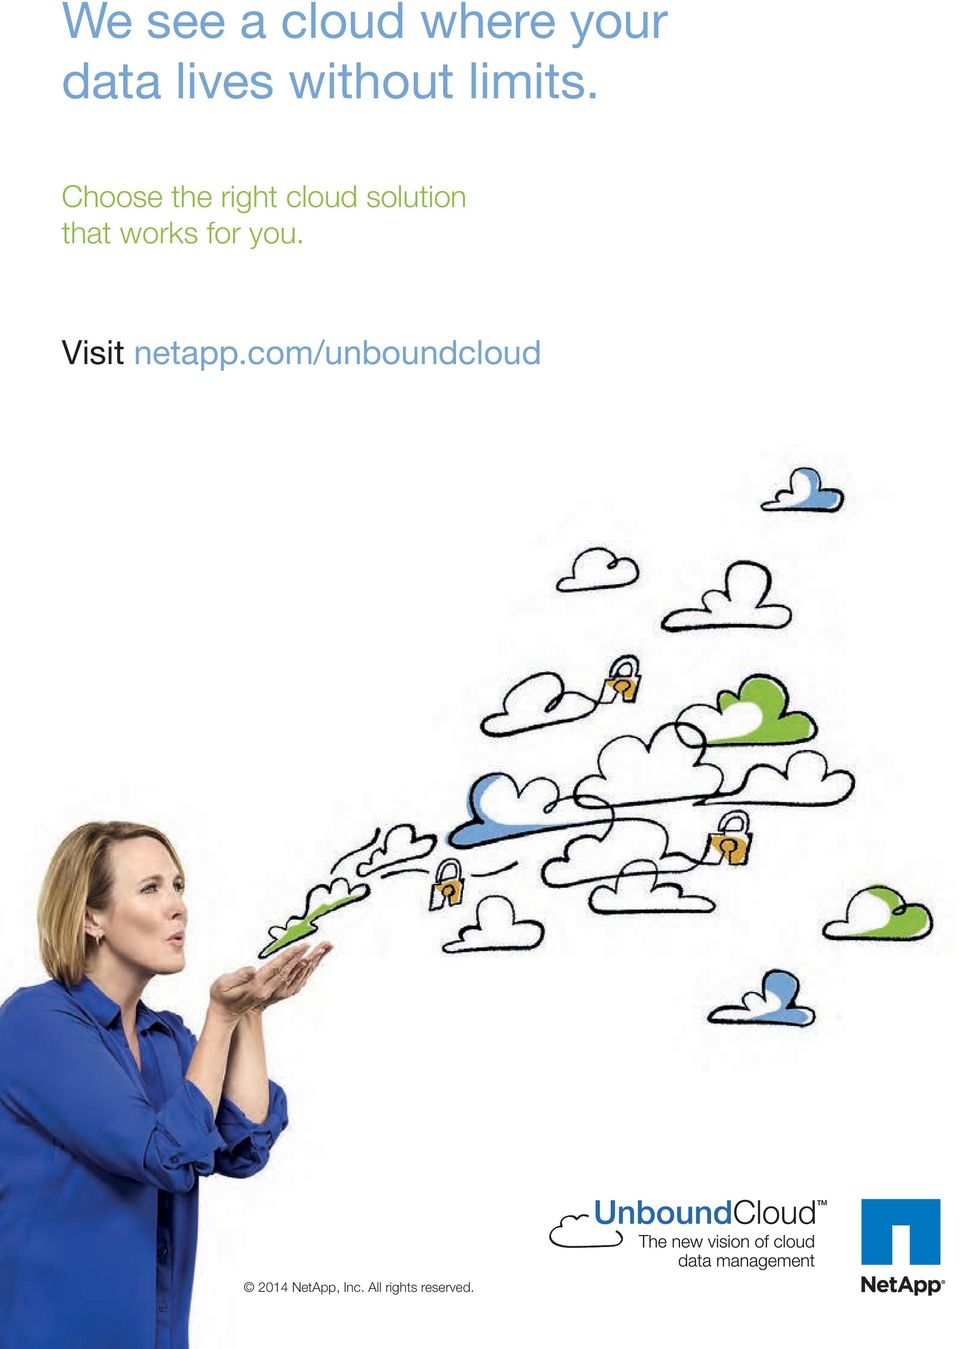 Choose the right cloud solution that works